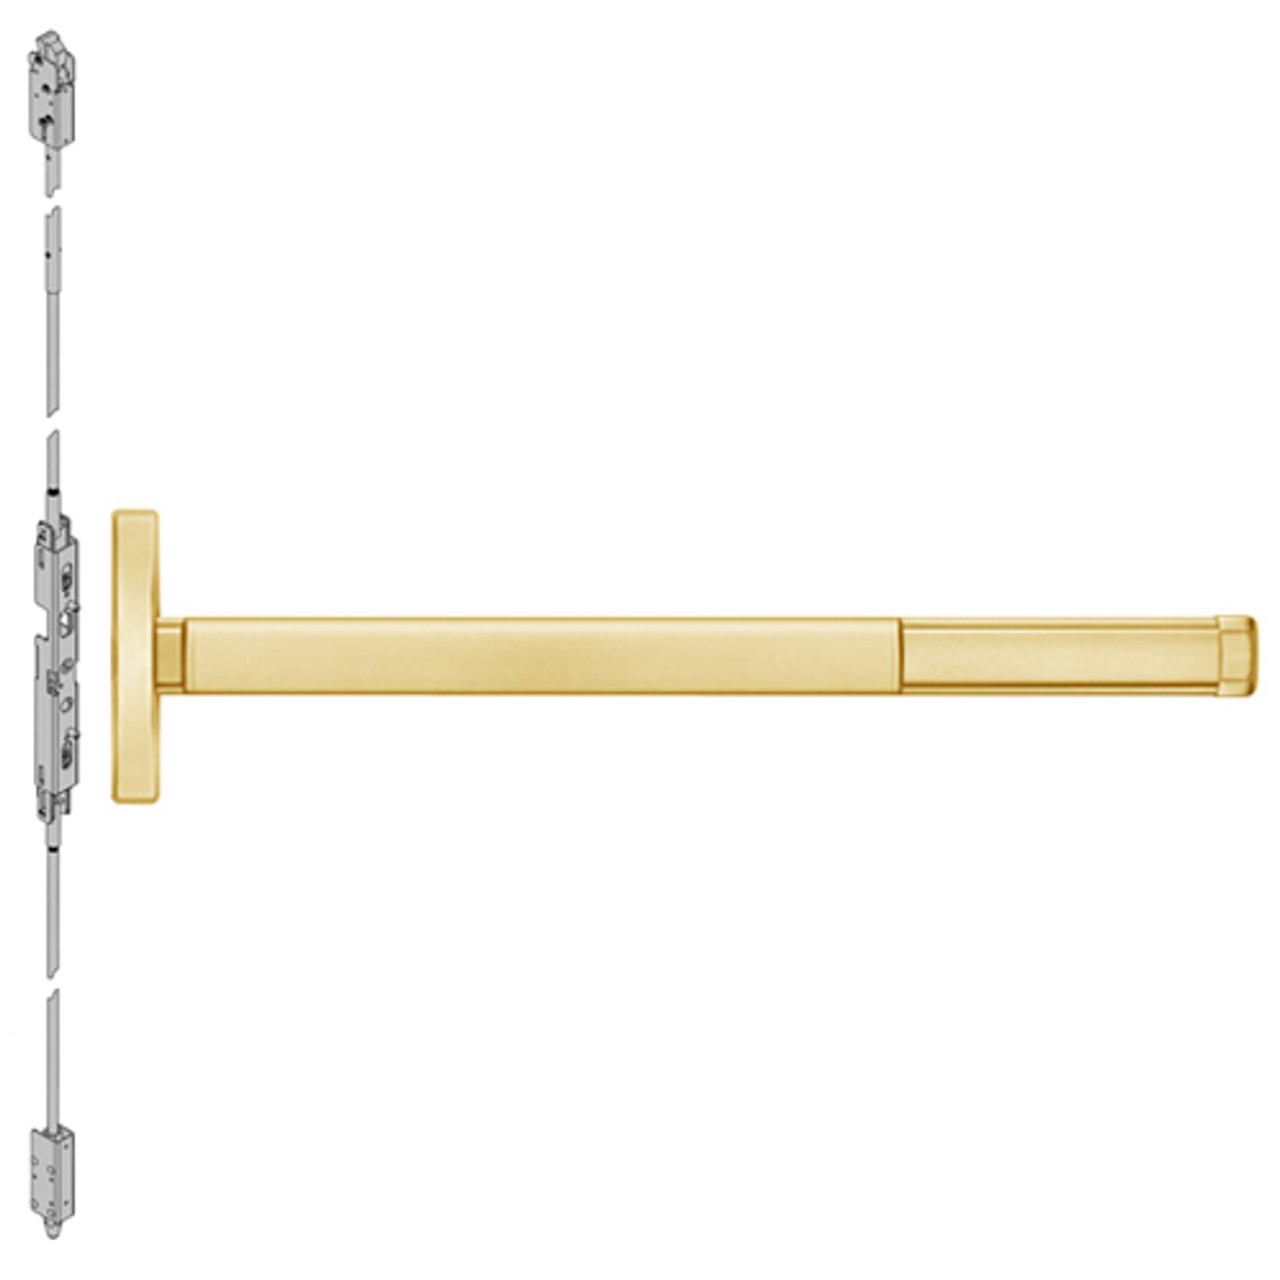 TS2603-605-48 PHI 2600 Series Concealed Vertical Rod Exit Device with Touchbar Monitoring Switch Prepped for Key Retracts Latchbolt in Bright Brass Finish